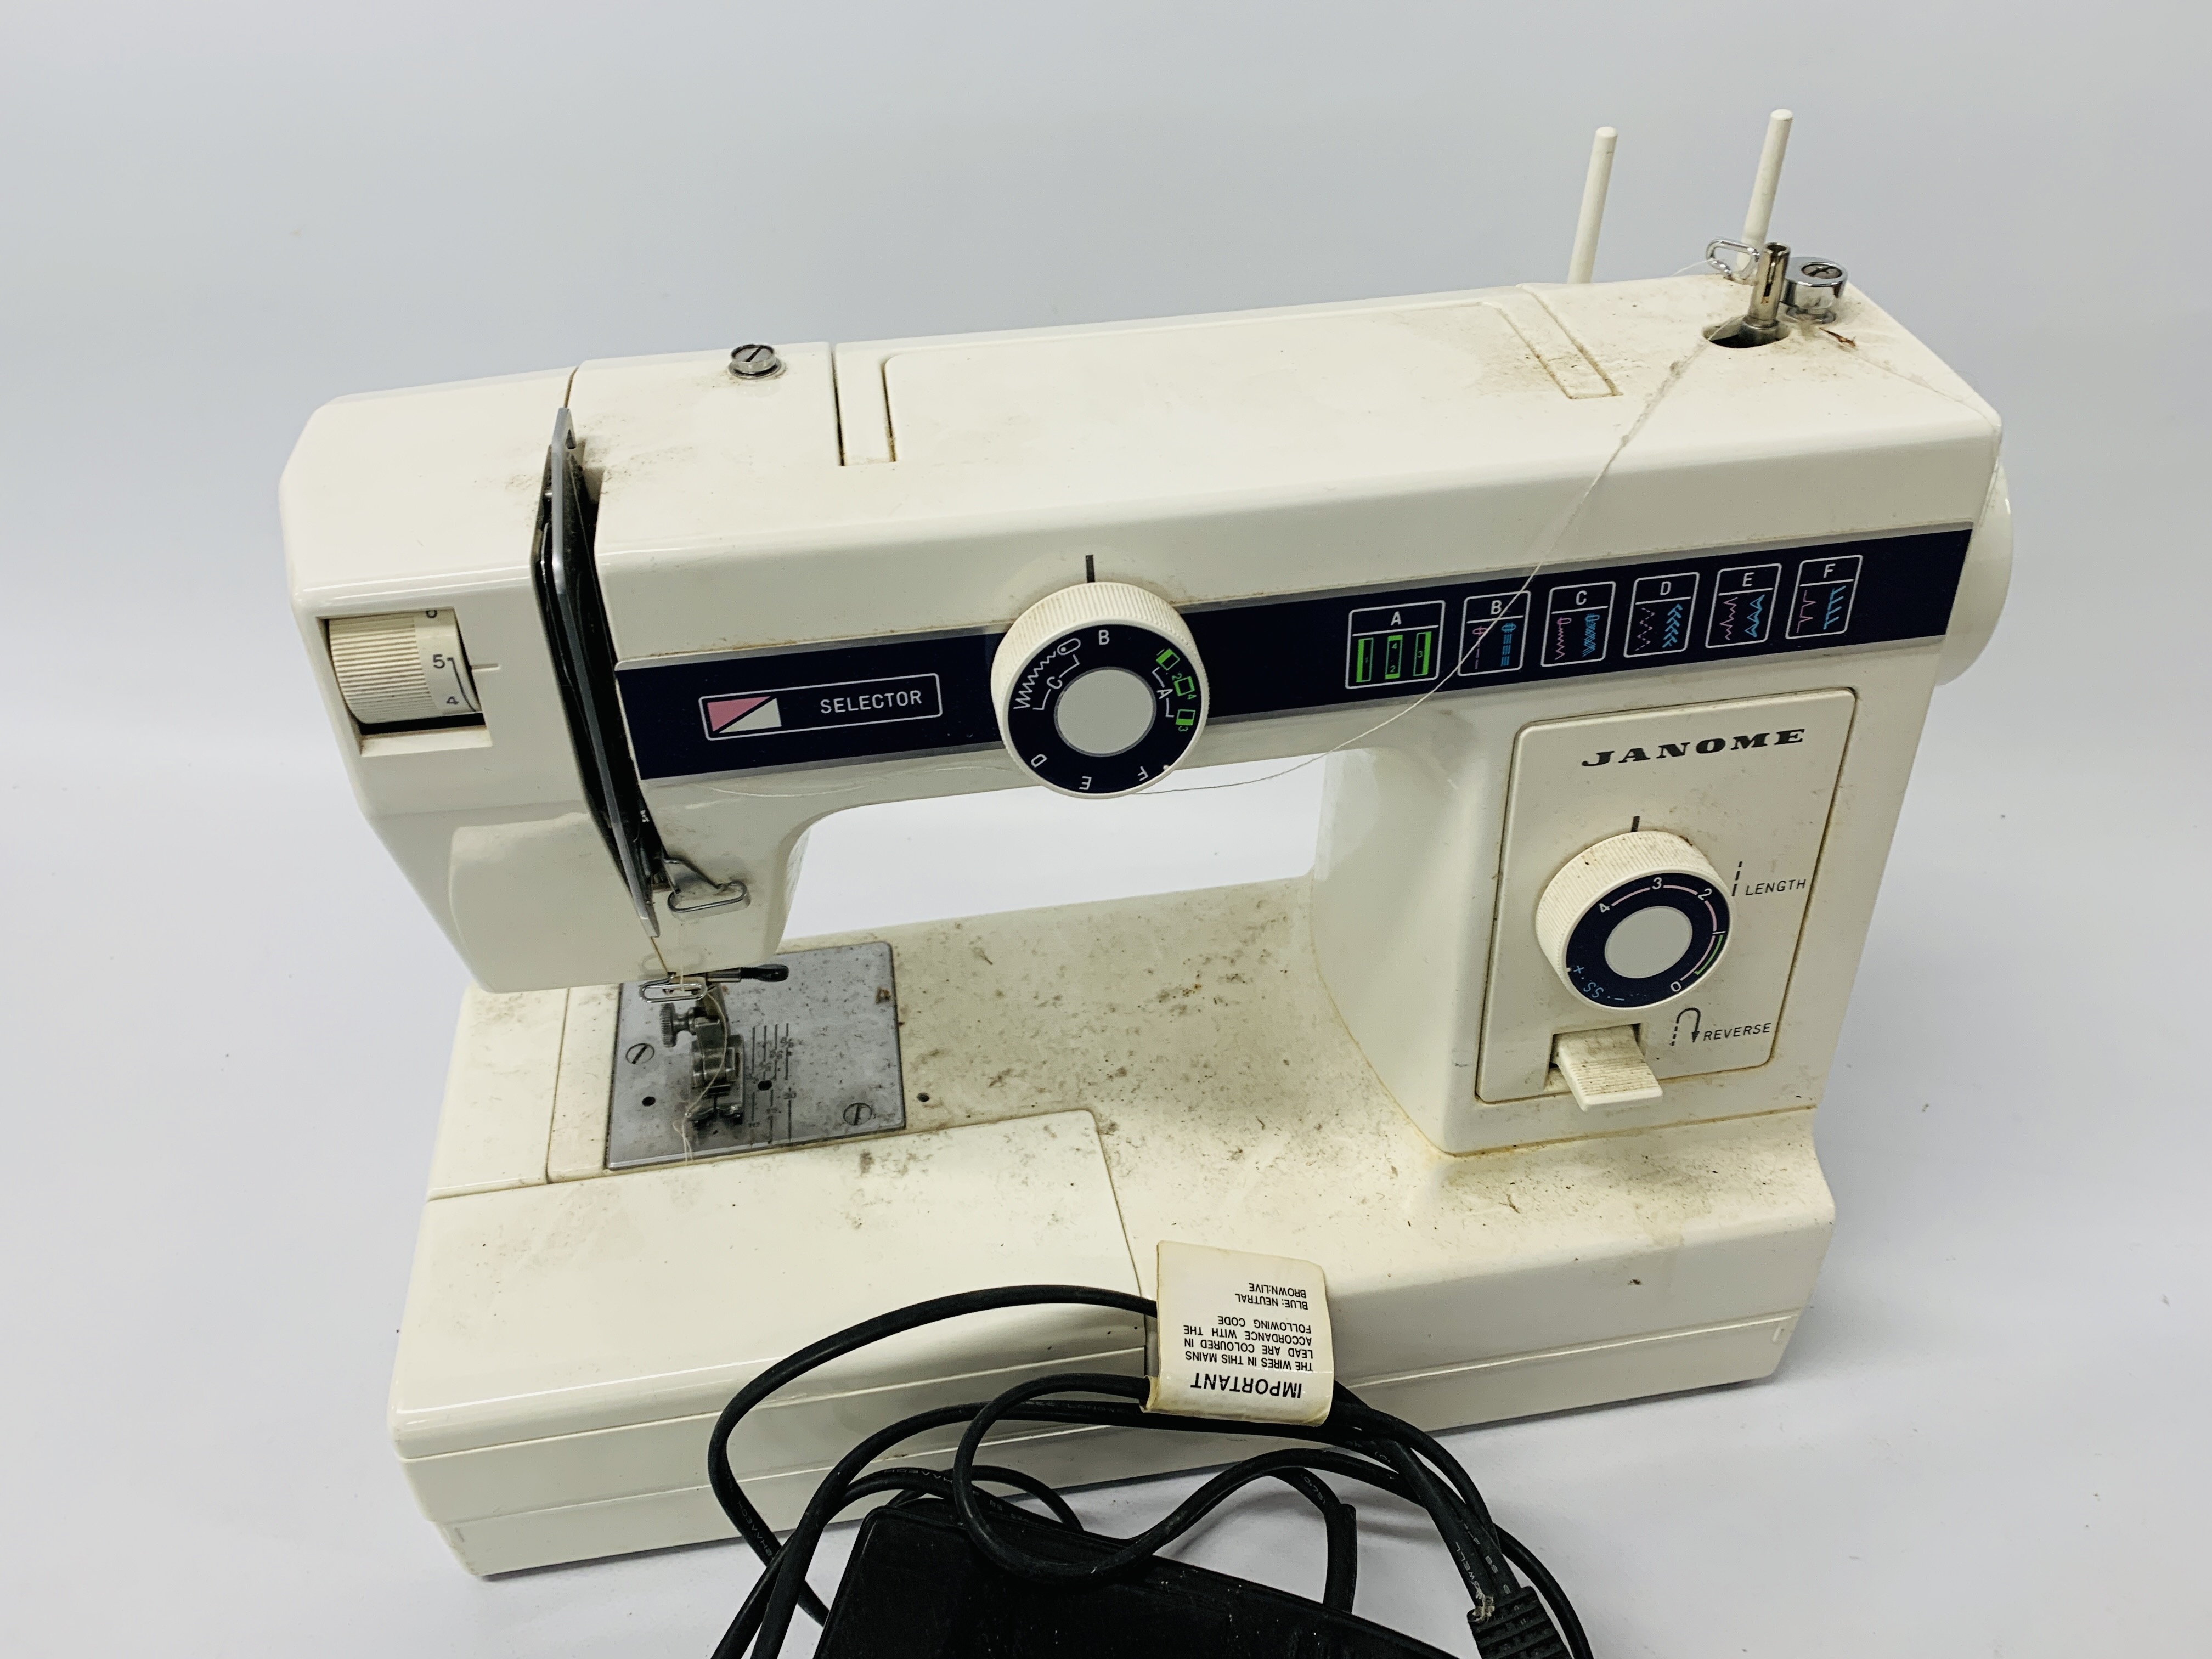 JANOME 110 SEWING MACHINE + VARIOUS KNITTING AND SEWING ACCESSORIES - SOLD AS SEEN - Image 2 of 12